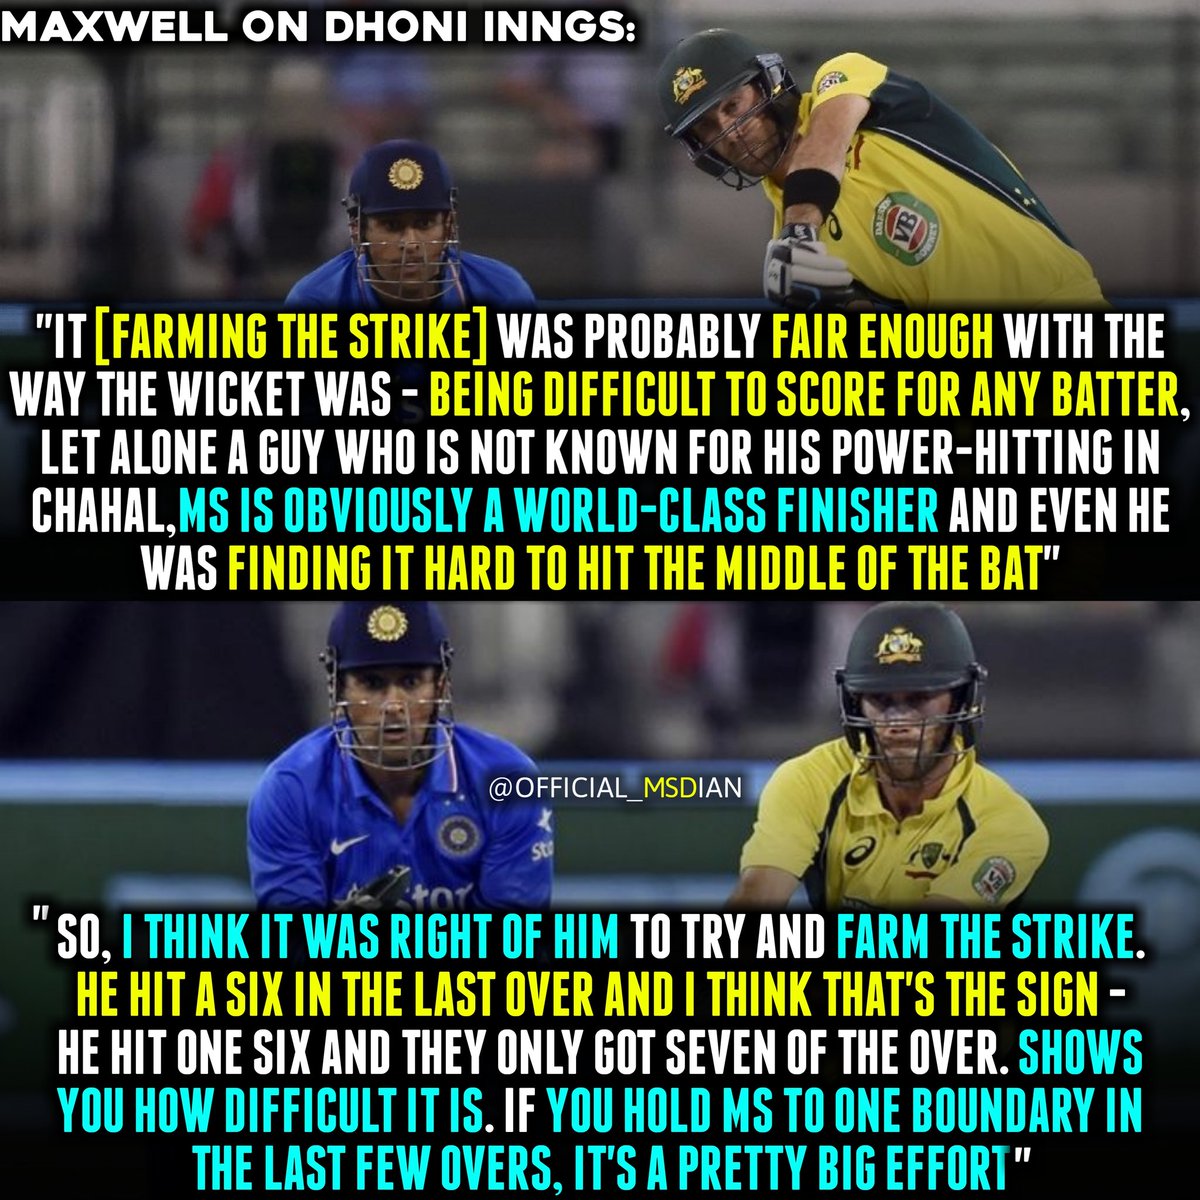 Maxwell on MS DHONI (This was 2nd or 3rd time he talked abt MSD this year)  #OZonMSD  #MSDhoni